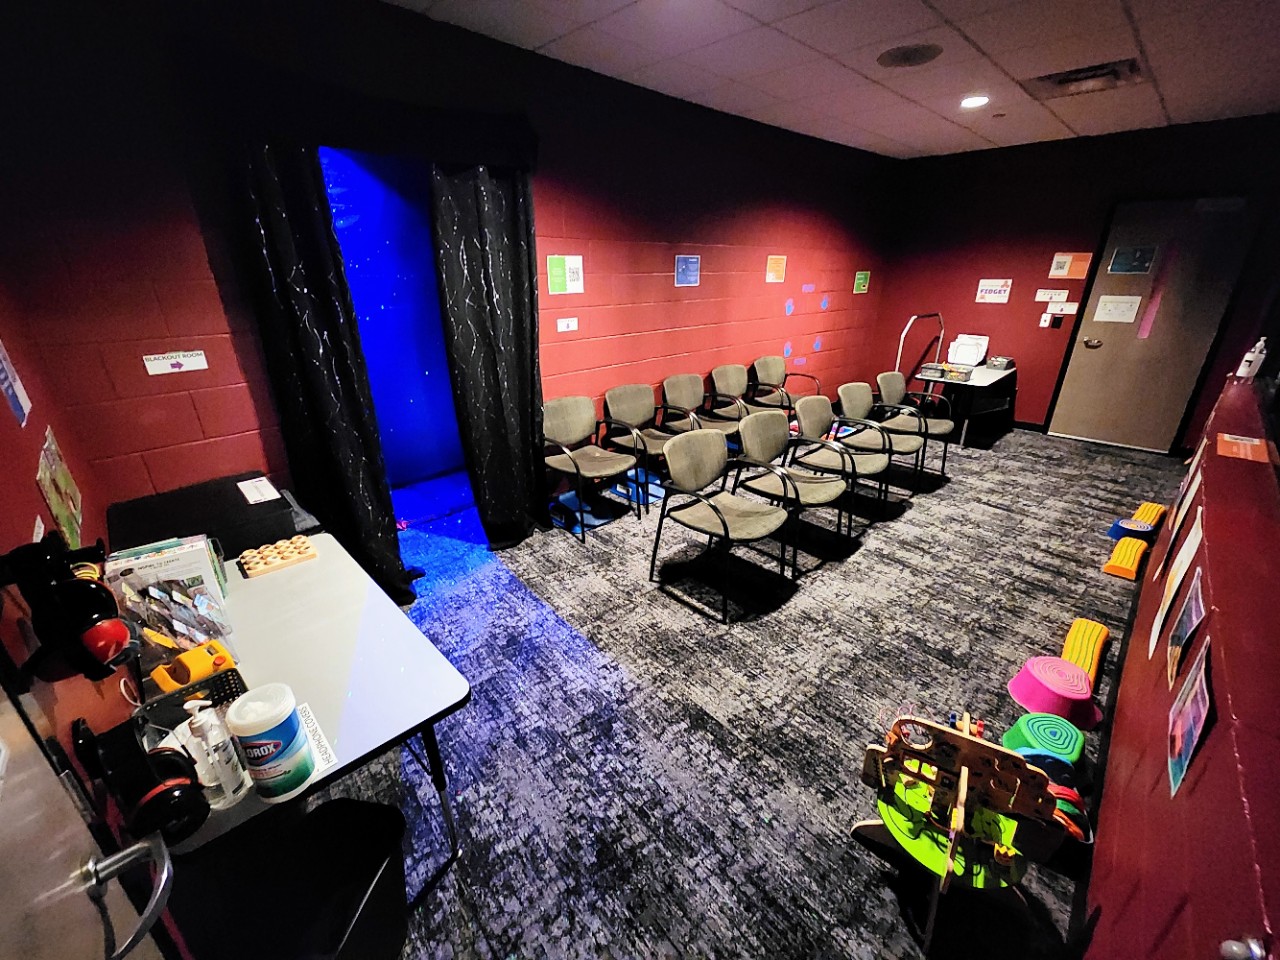 a room with chairs, low lighting, and some colorful toys and a window where attendees can watch the theater stage